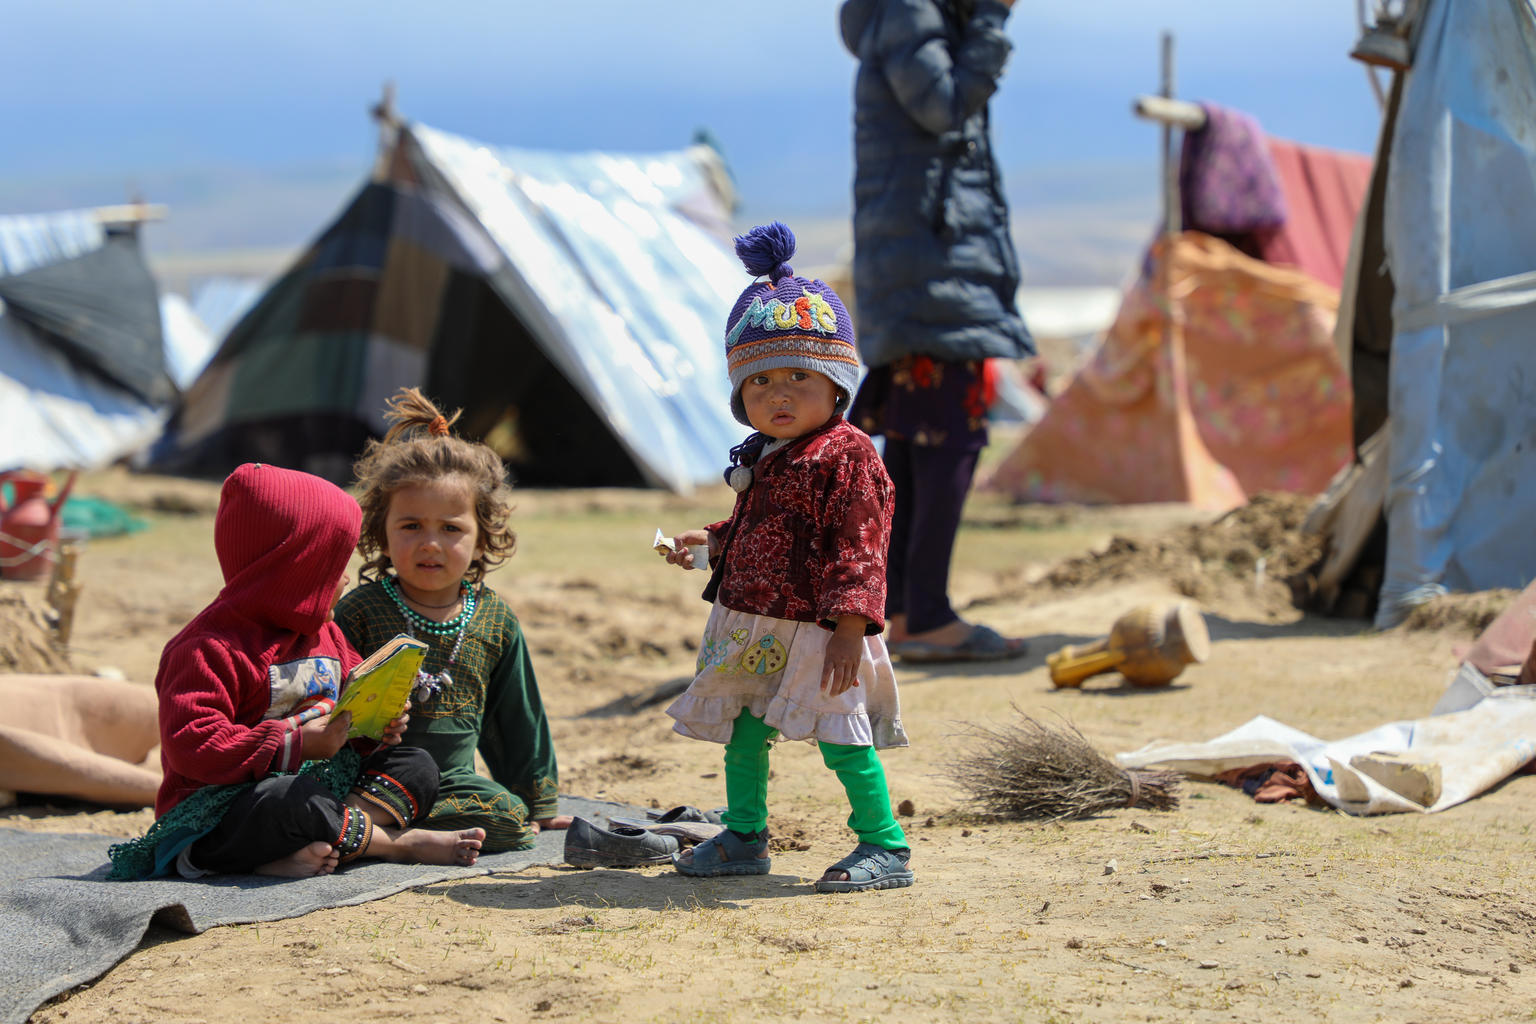 3 kids (2-3 years old) wearing winter cloth, in a camp setting